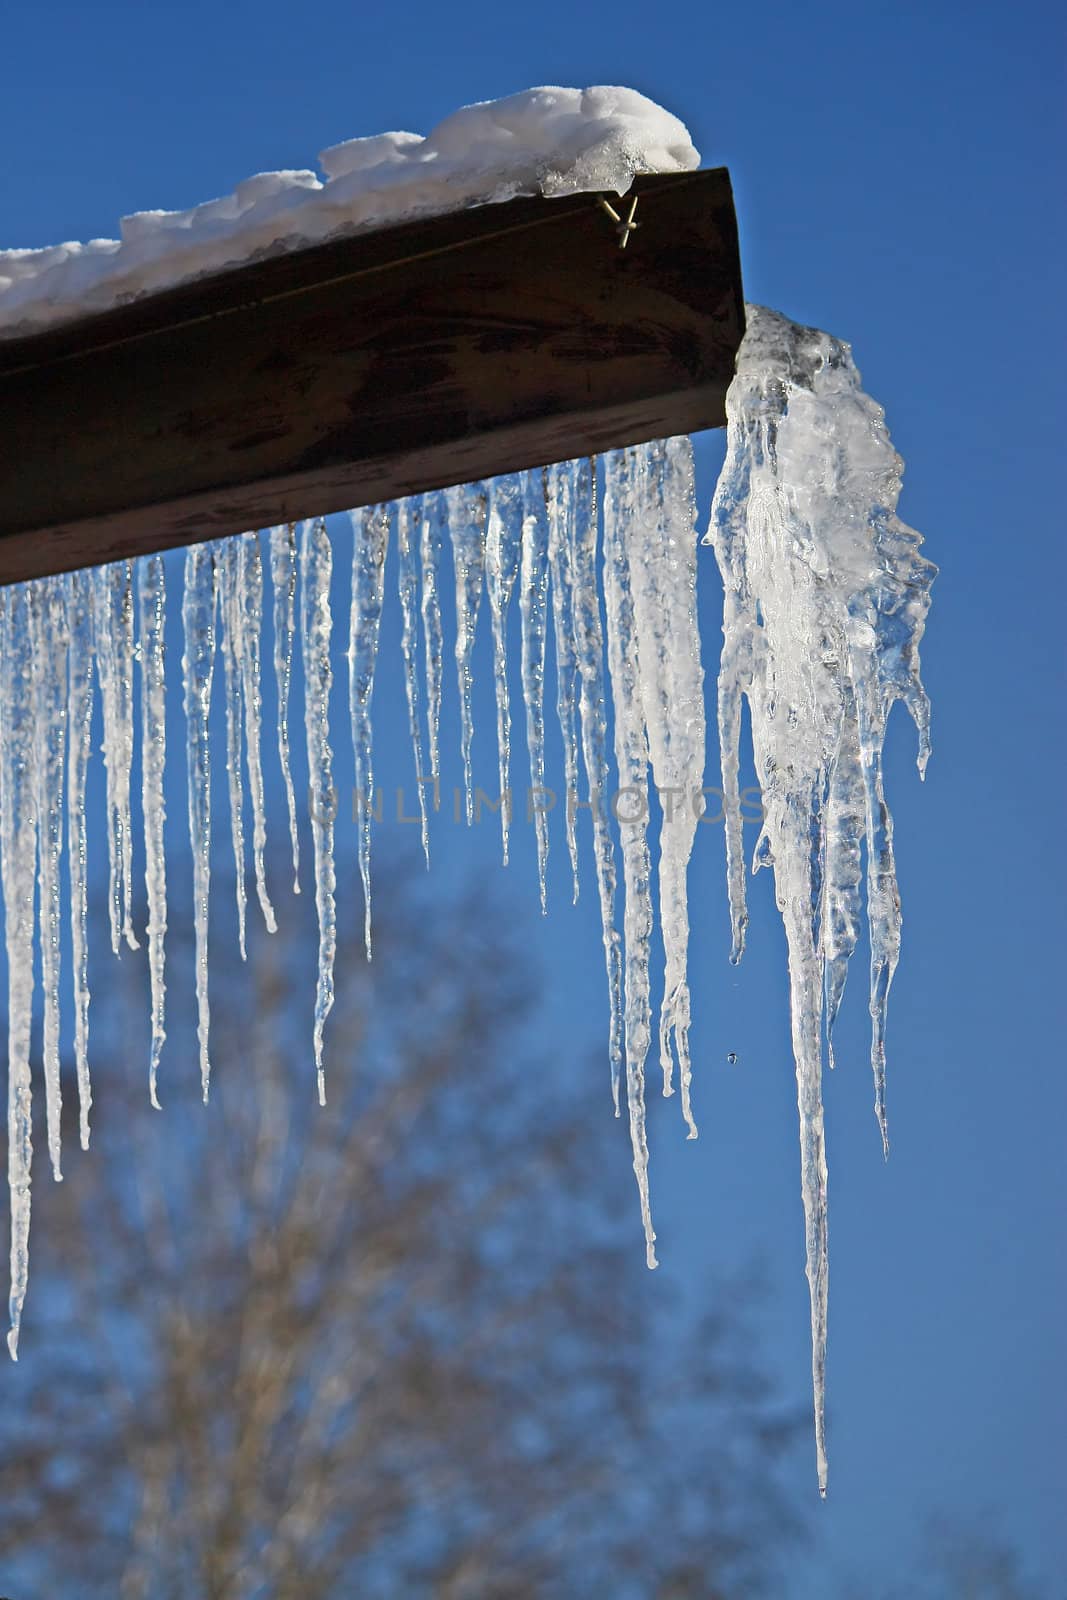 Large icicle formed at the end of roof gutter against clear blue sky.